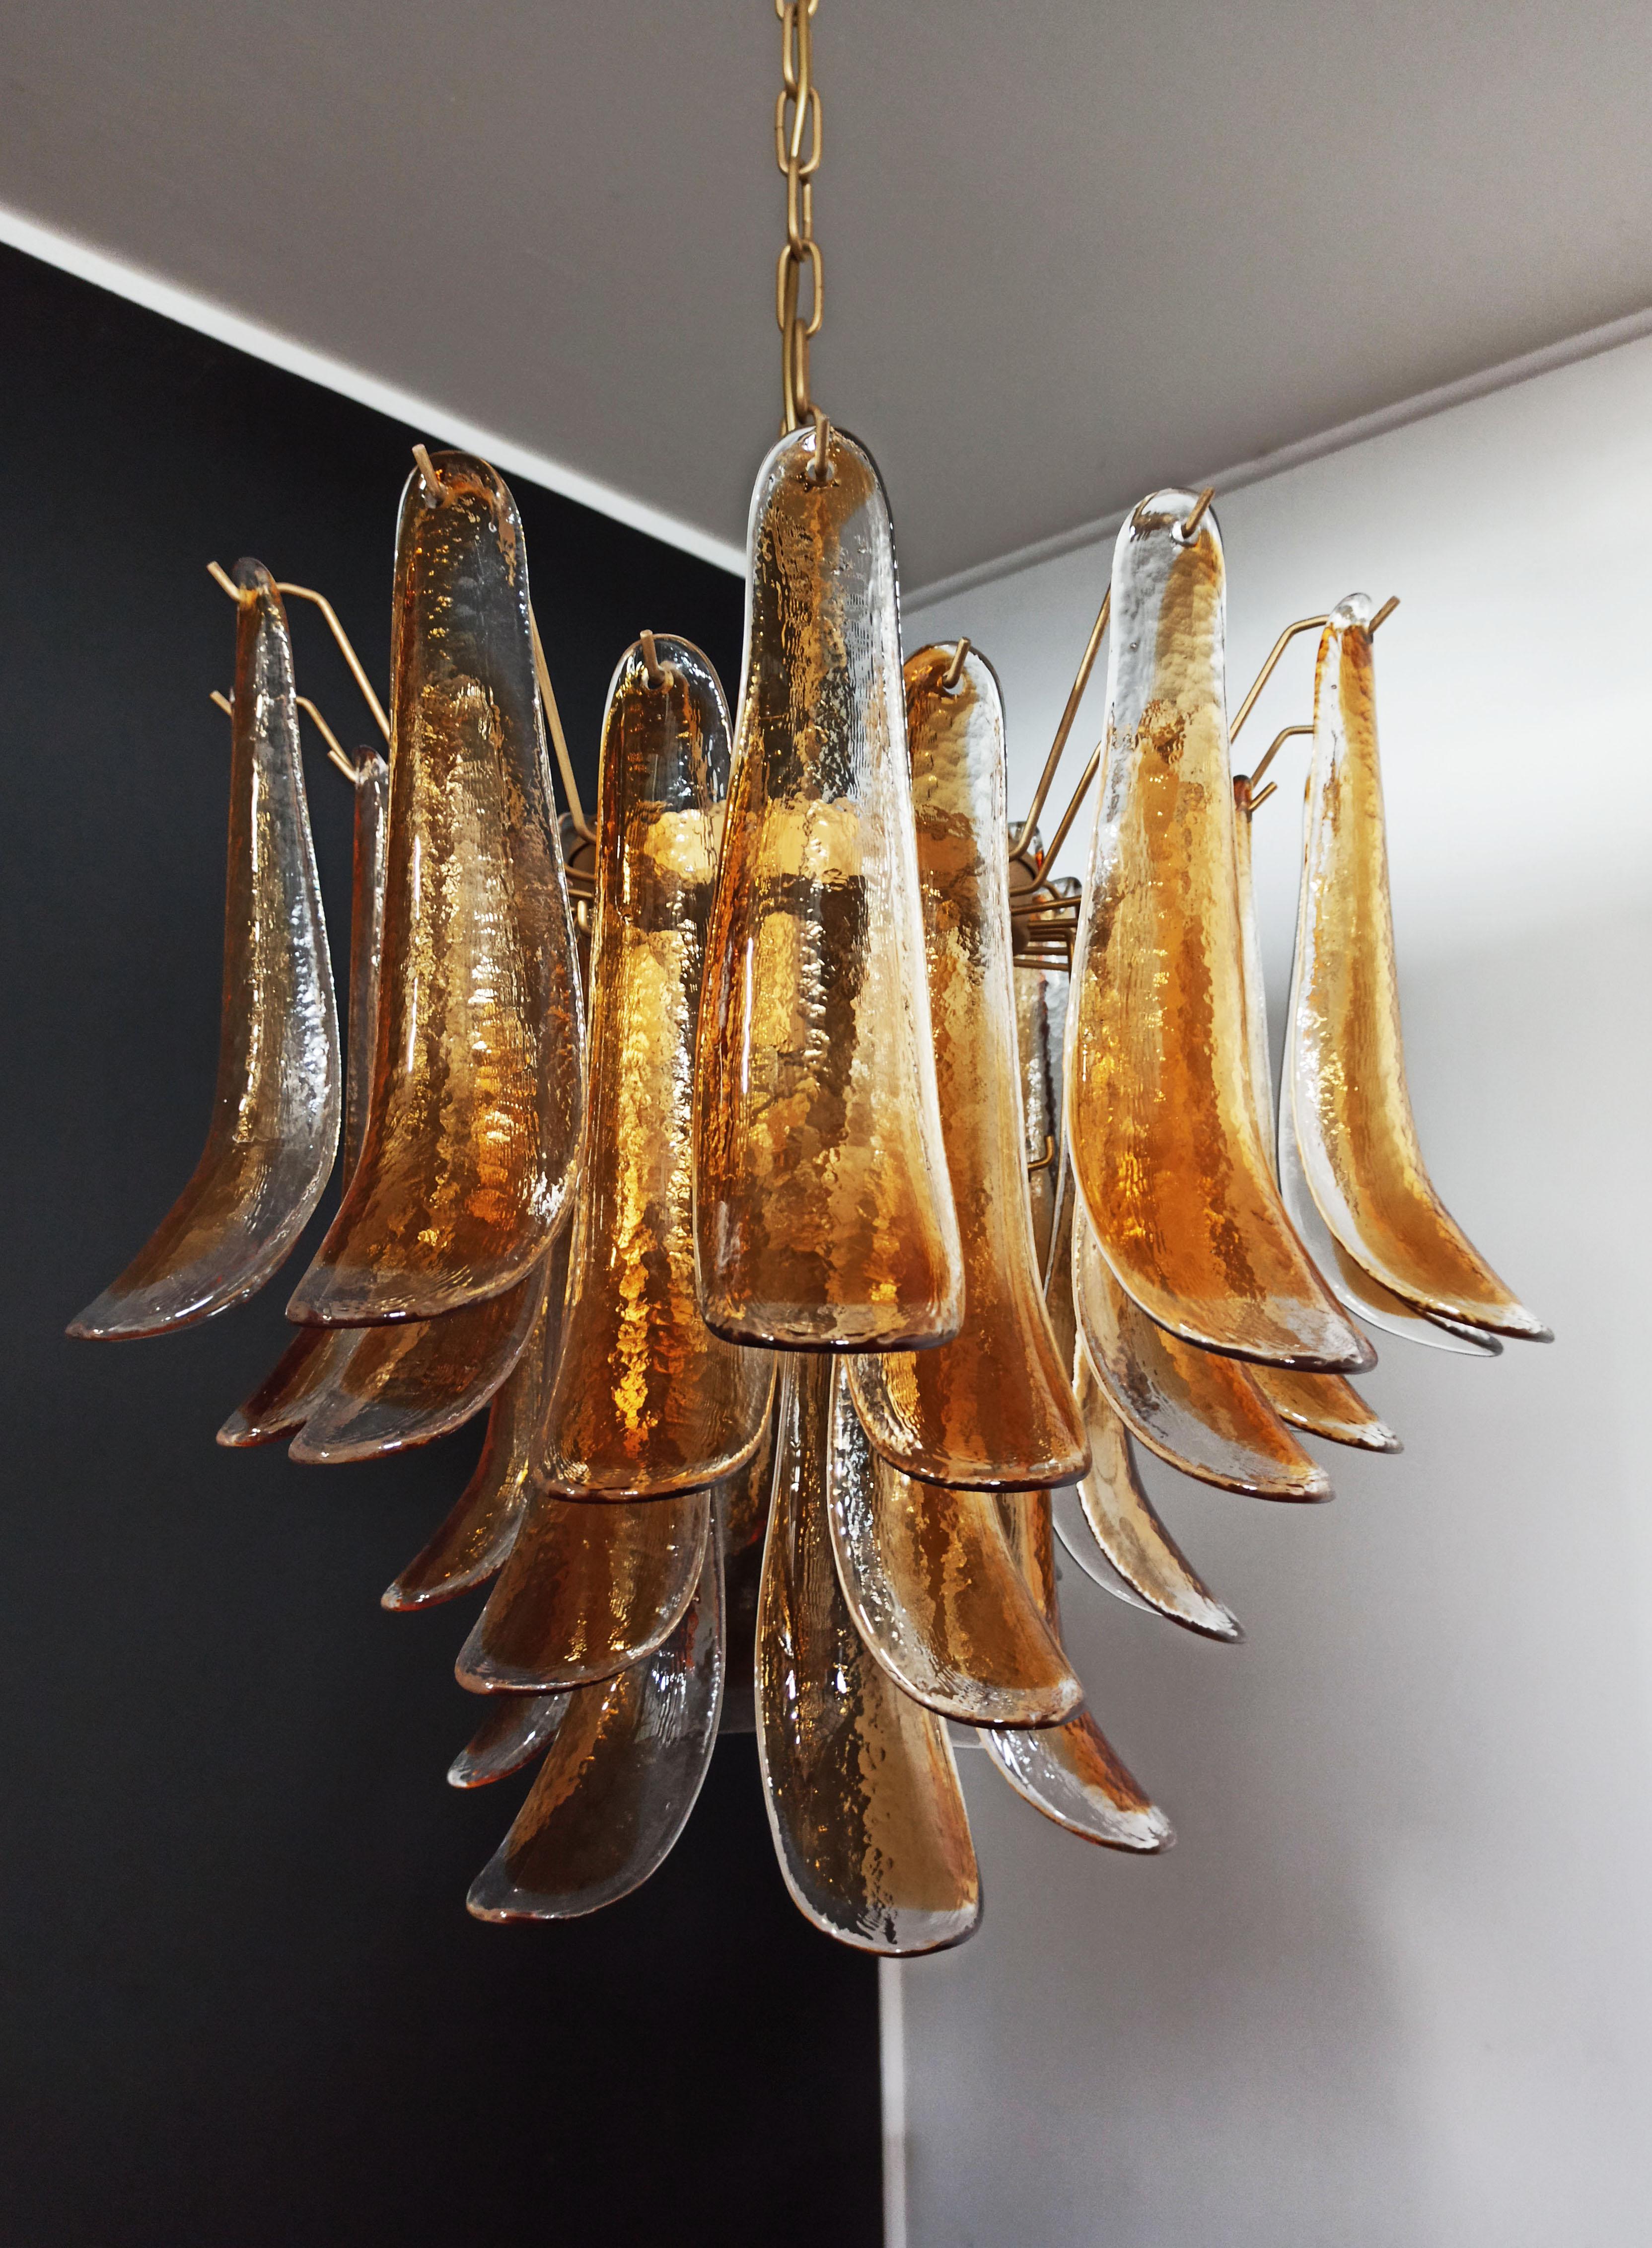 Fantastic chandelier with 36 transparent with an amber spot inside glasses, gold painted structure. The glasses are very high quality, the photos do not do the beauty, luster of these glasses.
Period: late XX century
Dimensions: 47.25 inches (120